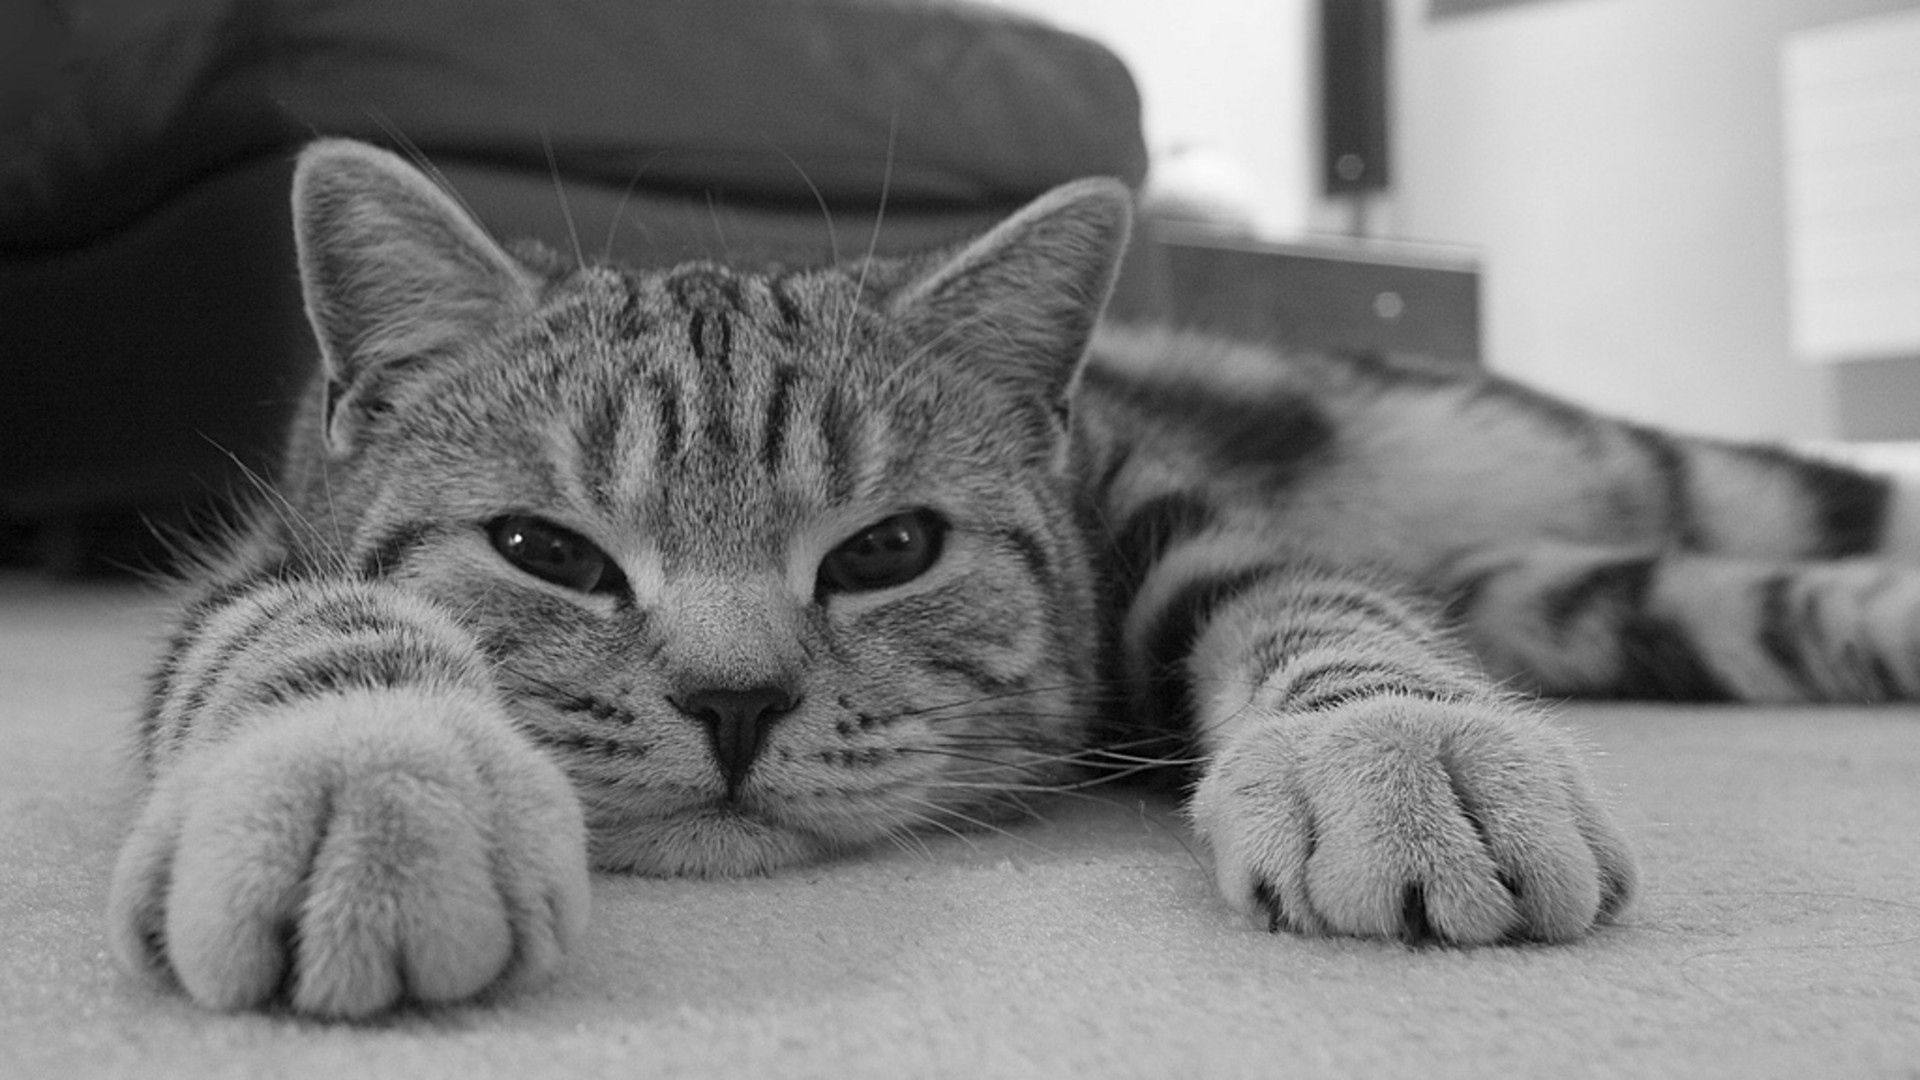 animals, relaxation, eyes, cat, muzzle, striped, rest, bw, chb